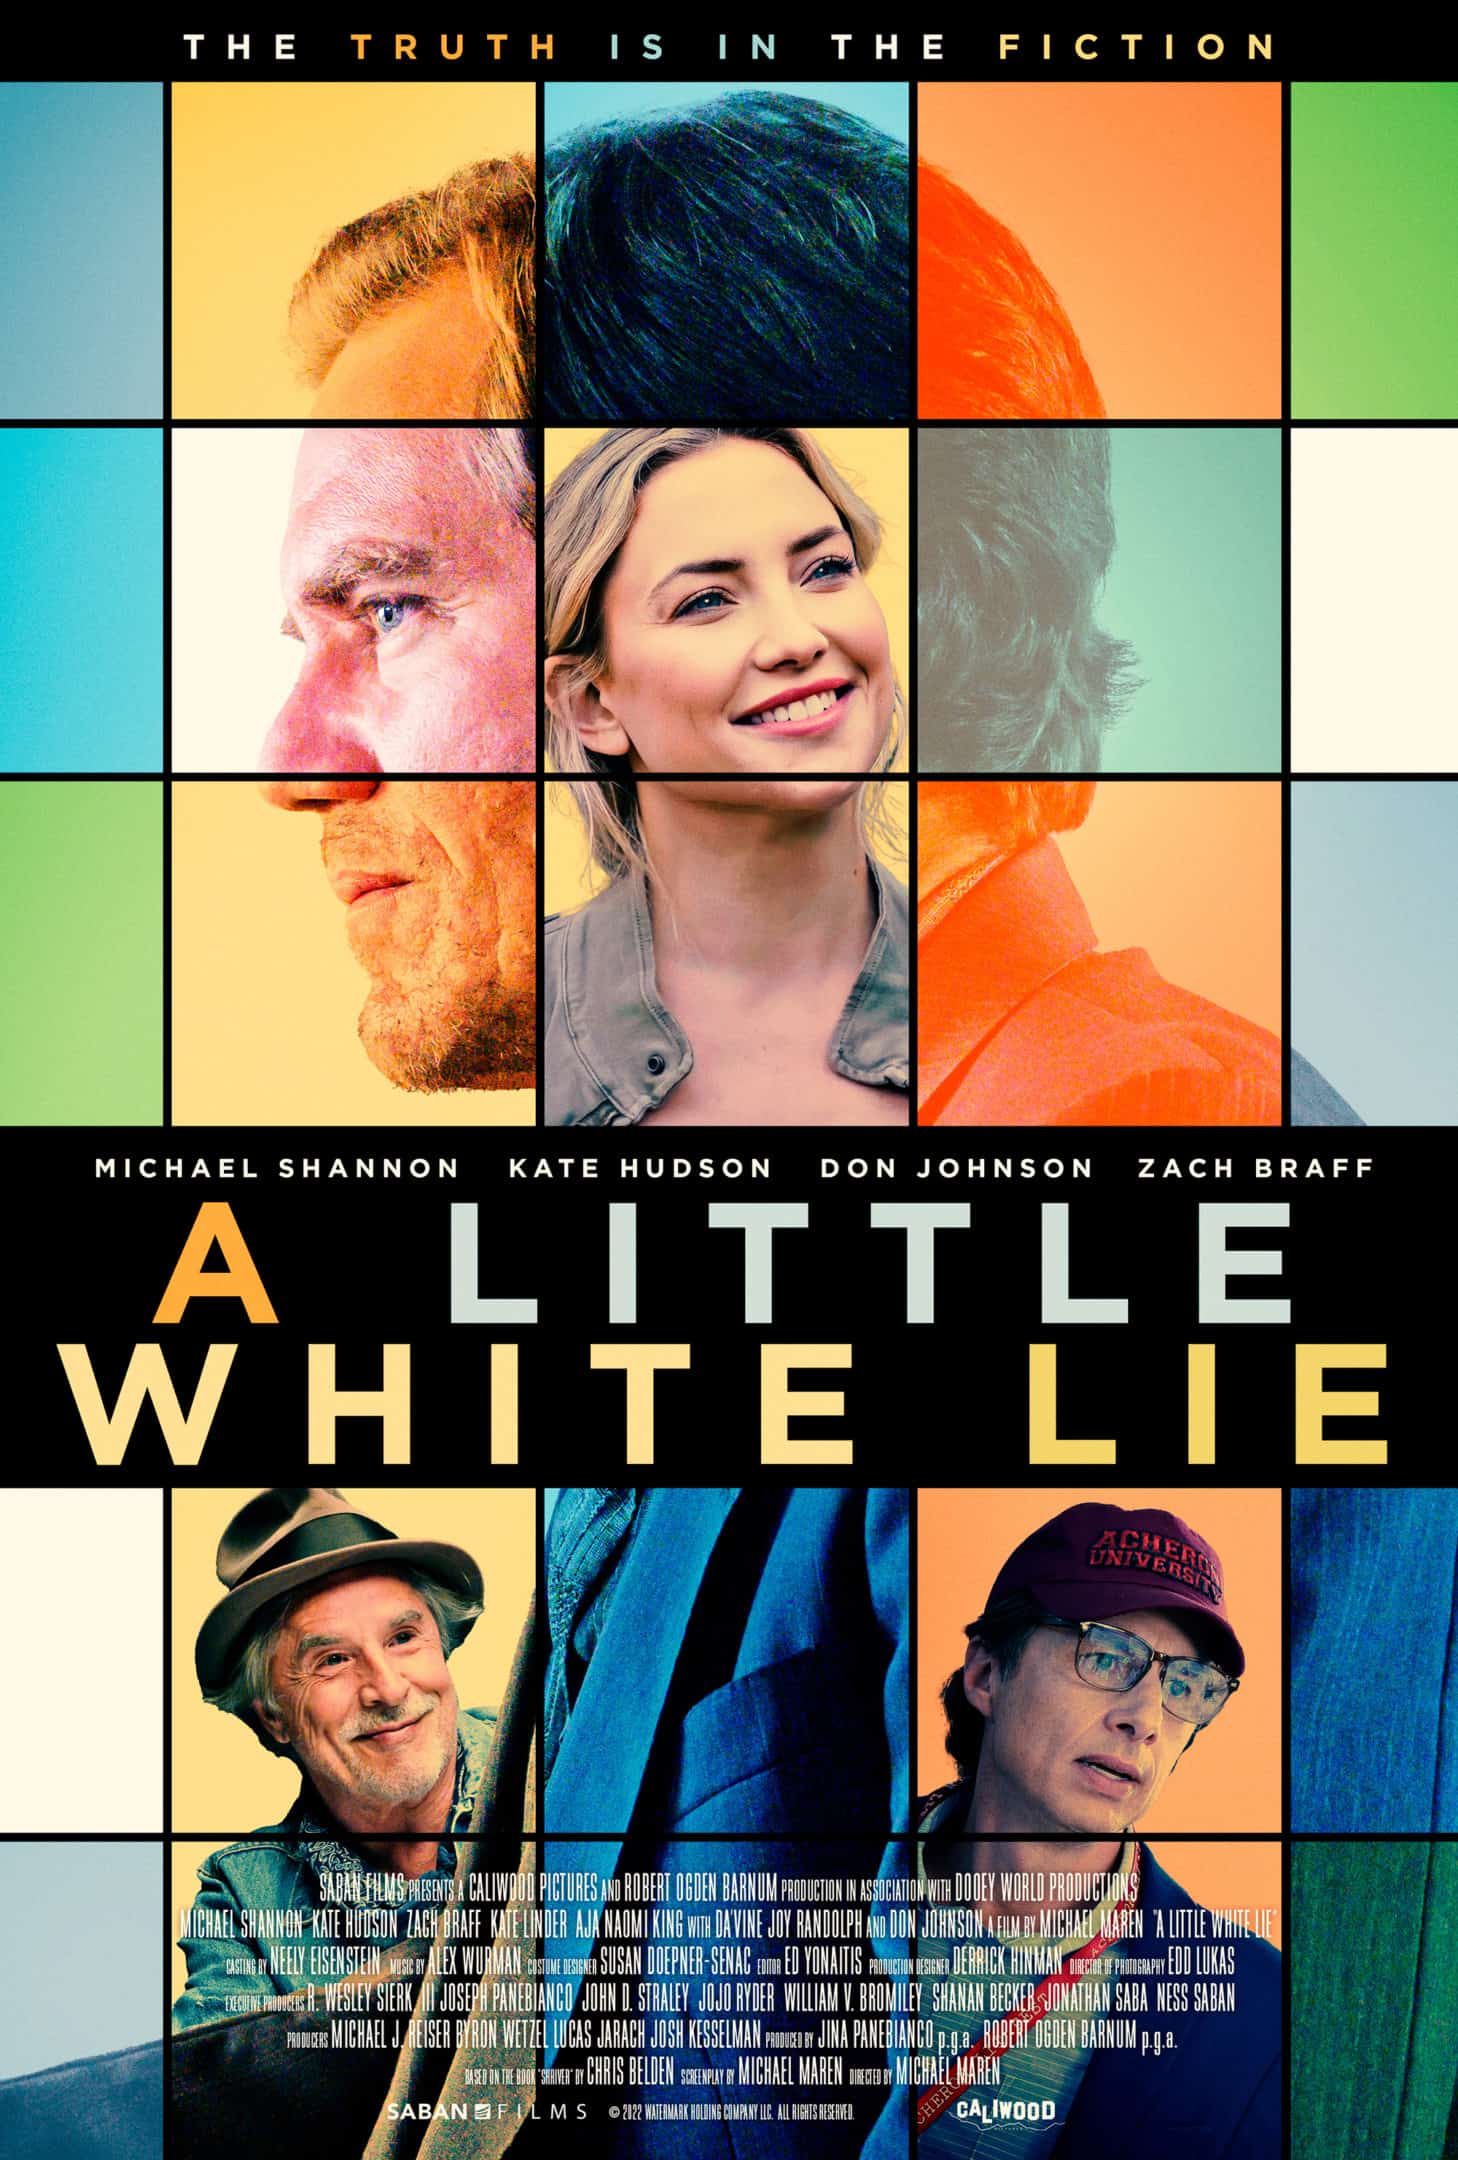 A Little White Lie lands a trailer and poster - IN THEATERS and VOD March 3rd 3